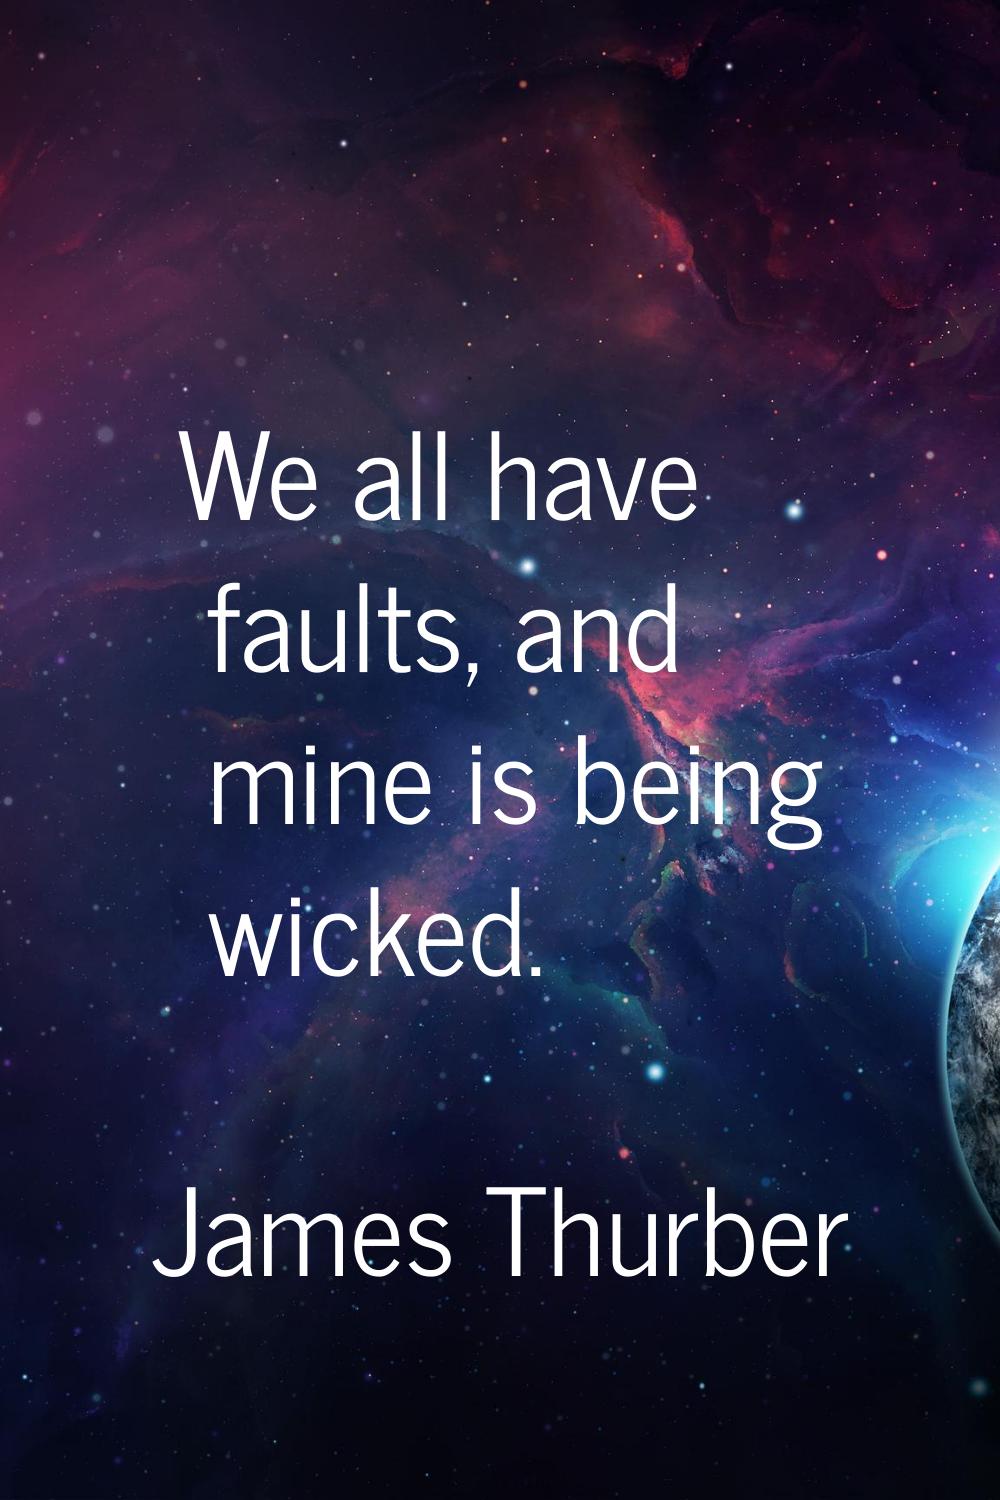 We all have faults, and mine is being wicked.